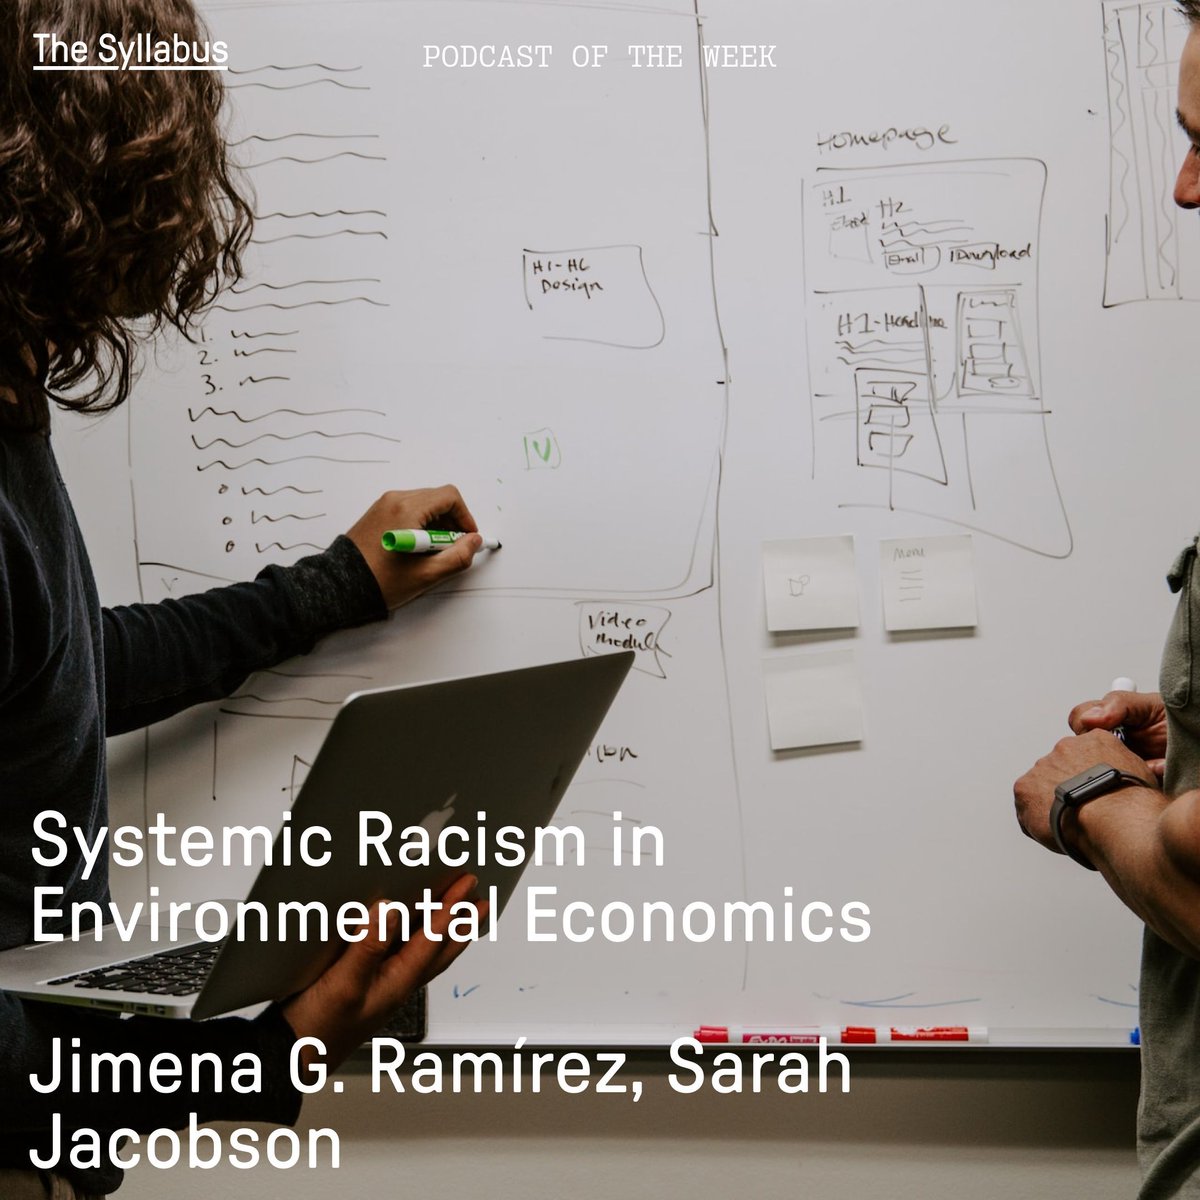 Our Podcast of the Week explains how systemic racism affects research in the field of environmental and natural resource economics. By @jimena_econ & @SarahJacobsonEc in @ResourcesMag buff.ly/46gscnk